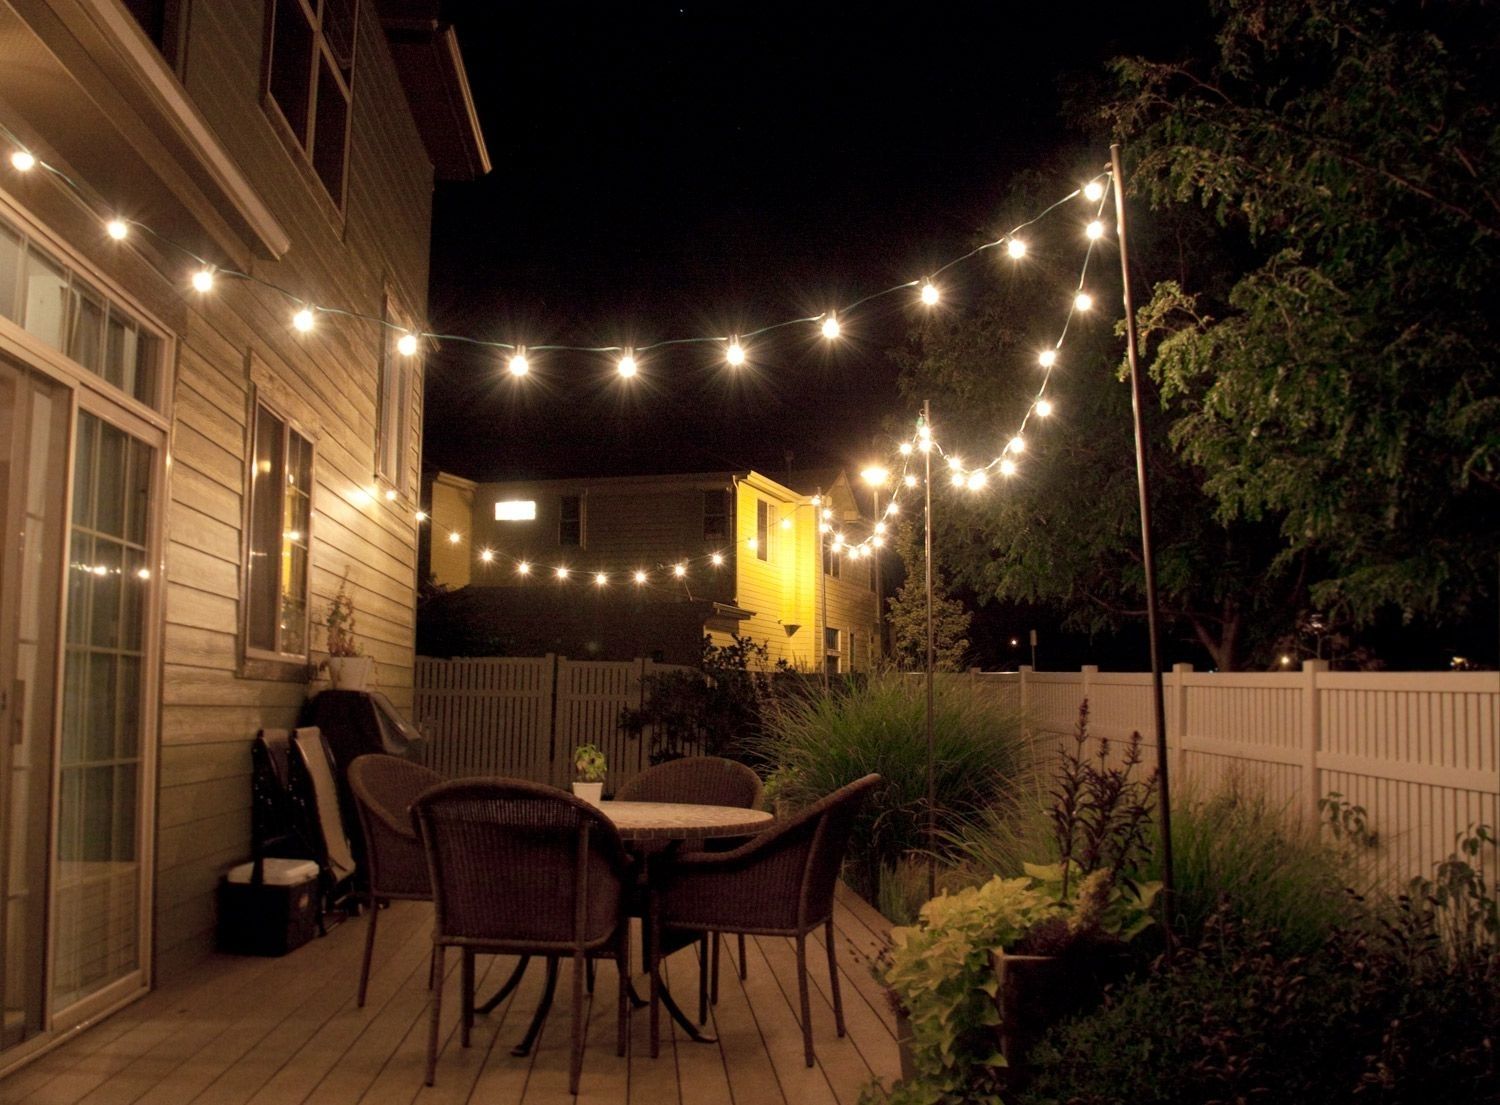 How To Make Inexpensive Poles To Hang String Lights On – Café Style Pertaining To Hanging Outdoor Lights On Fence (View 12 of 15)